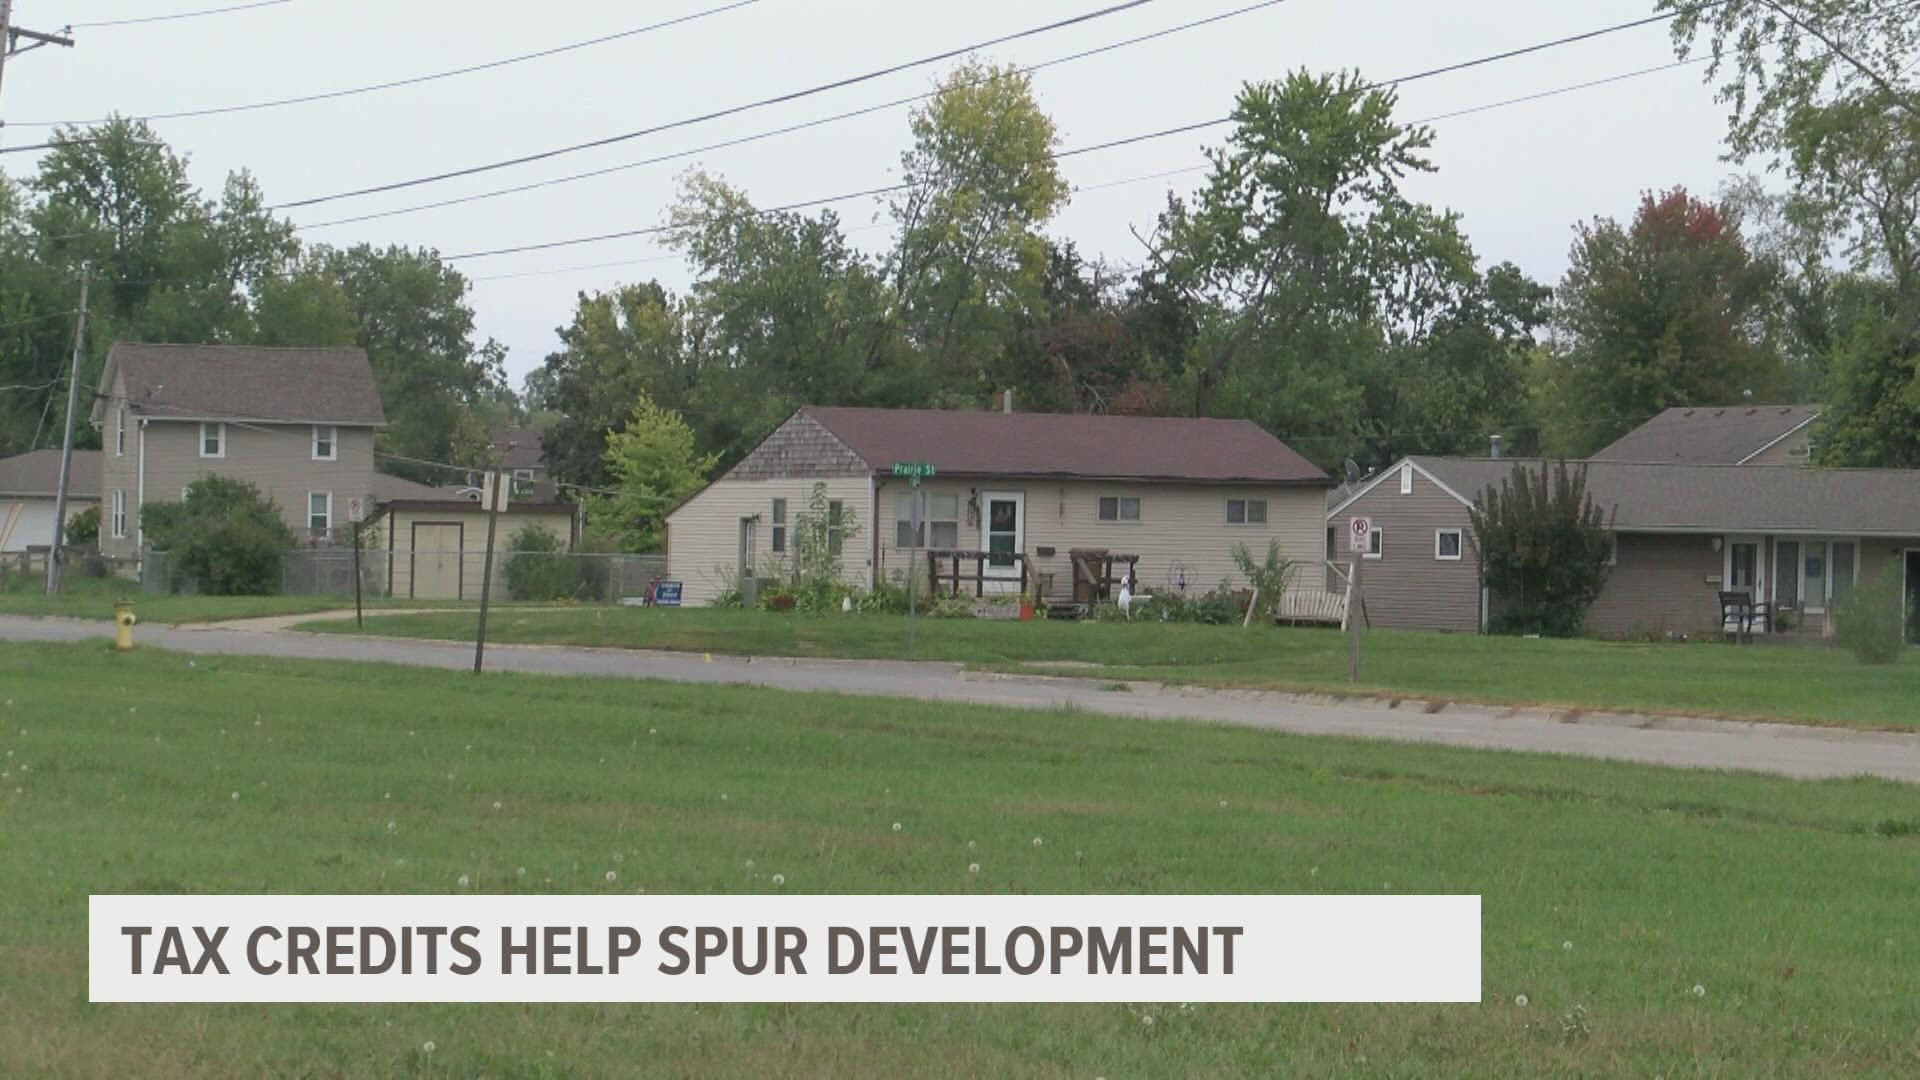 This year, developers in Grinnell have received nearly $1.7 million to add 87 housing units in the city.